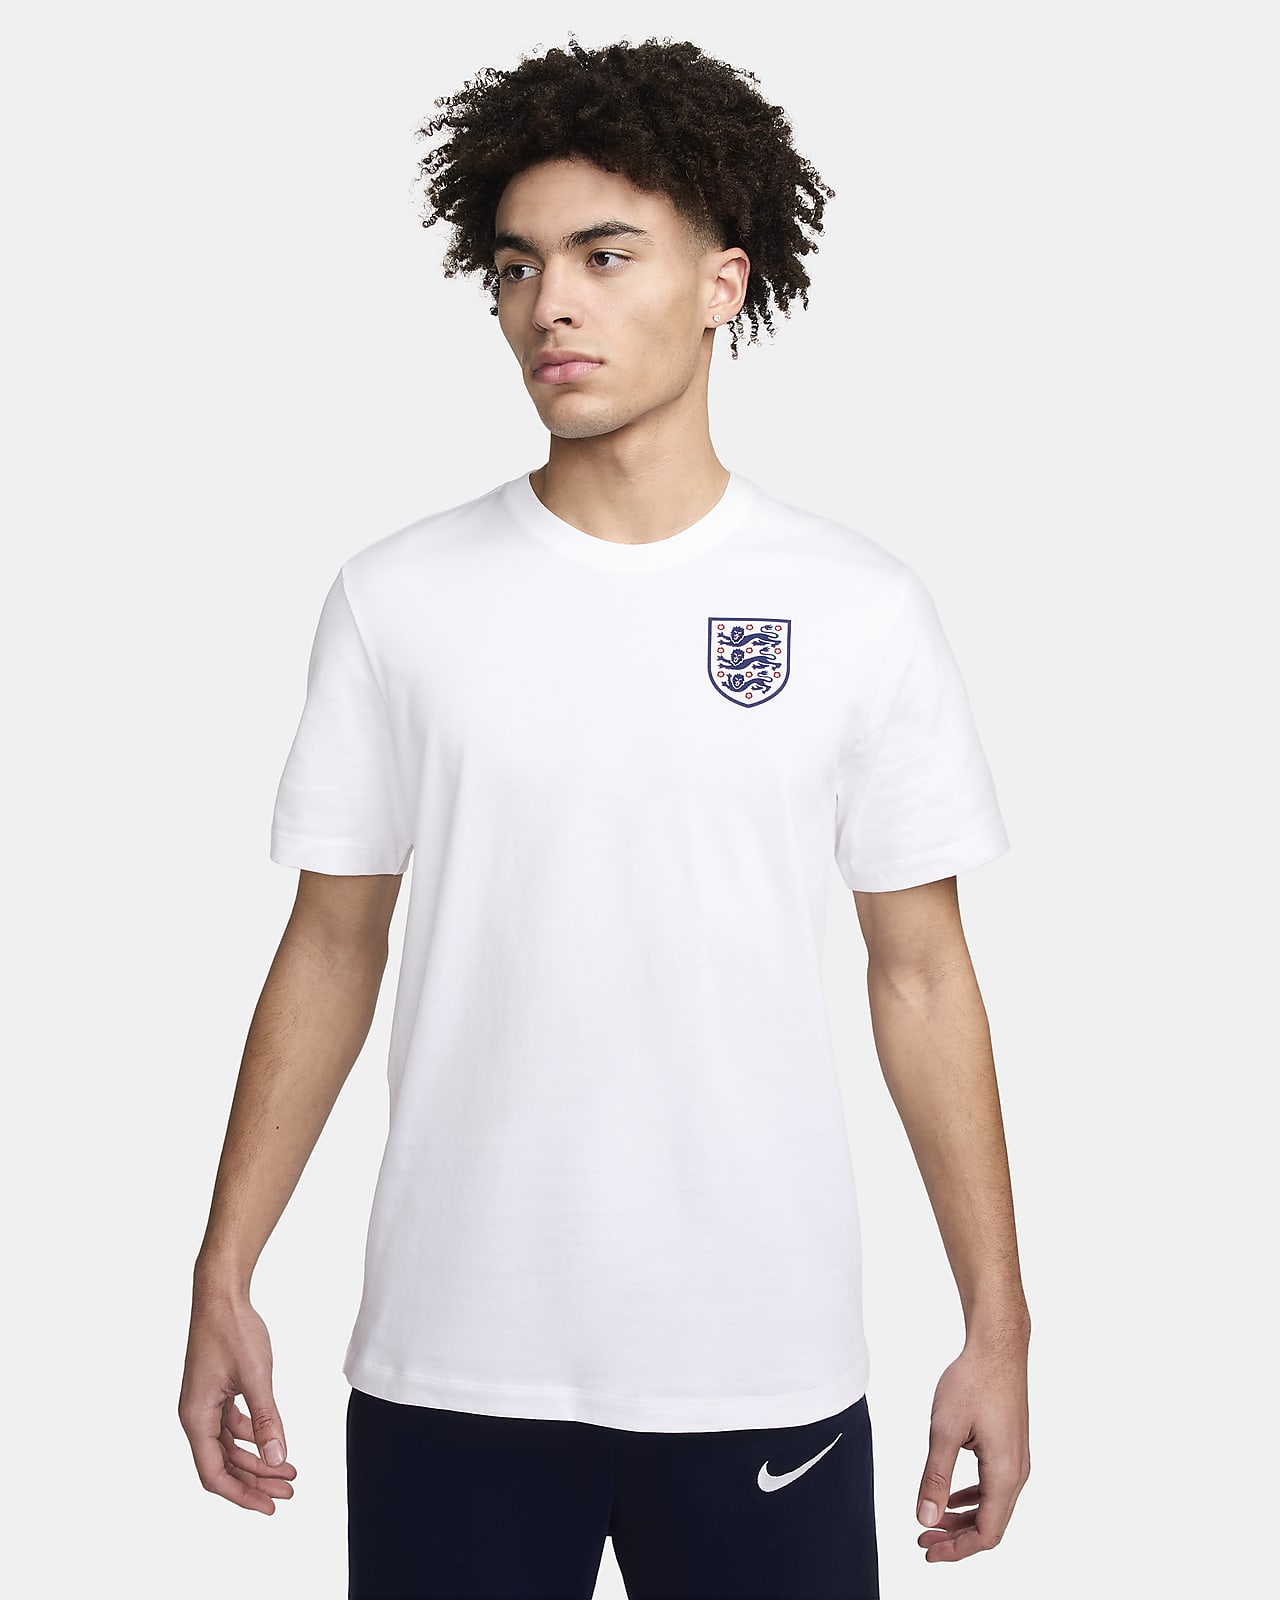 T-shirt Nike Football Angleterre pour homme